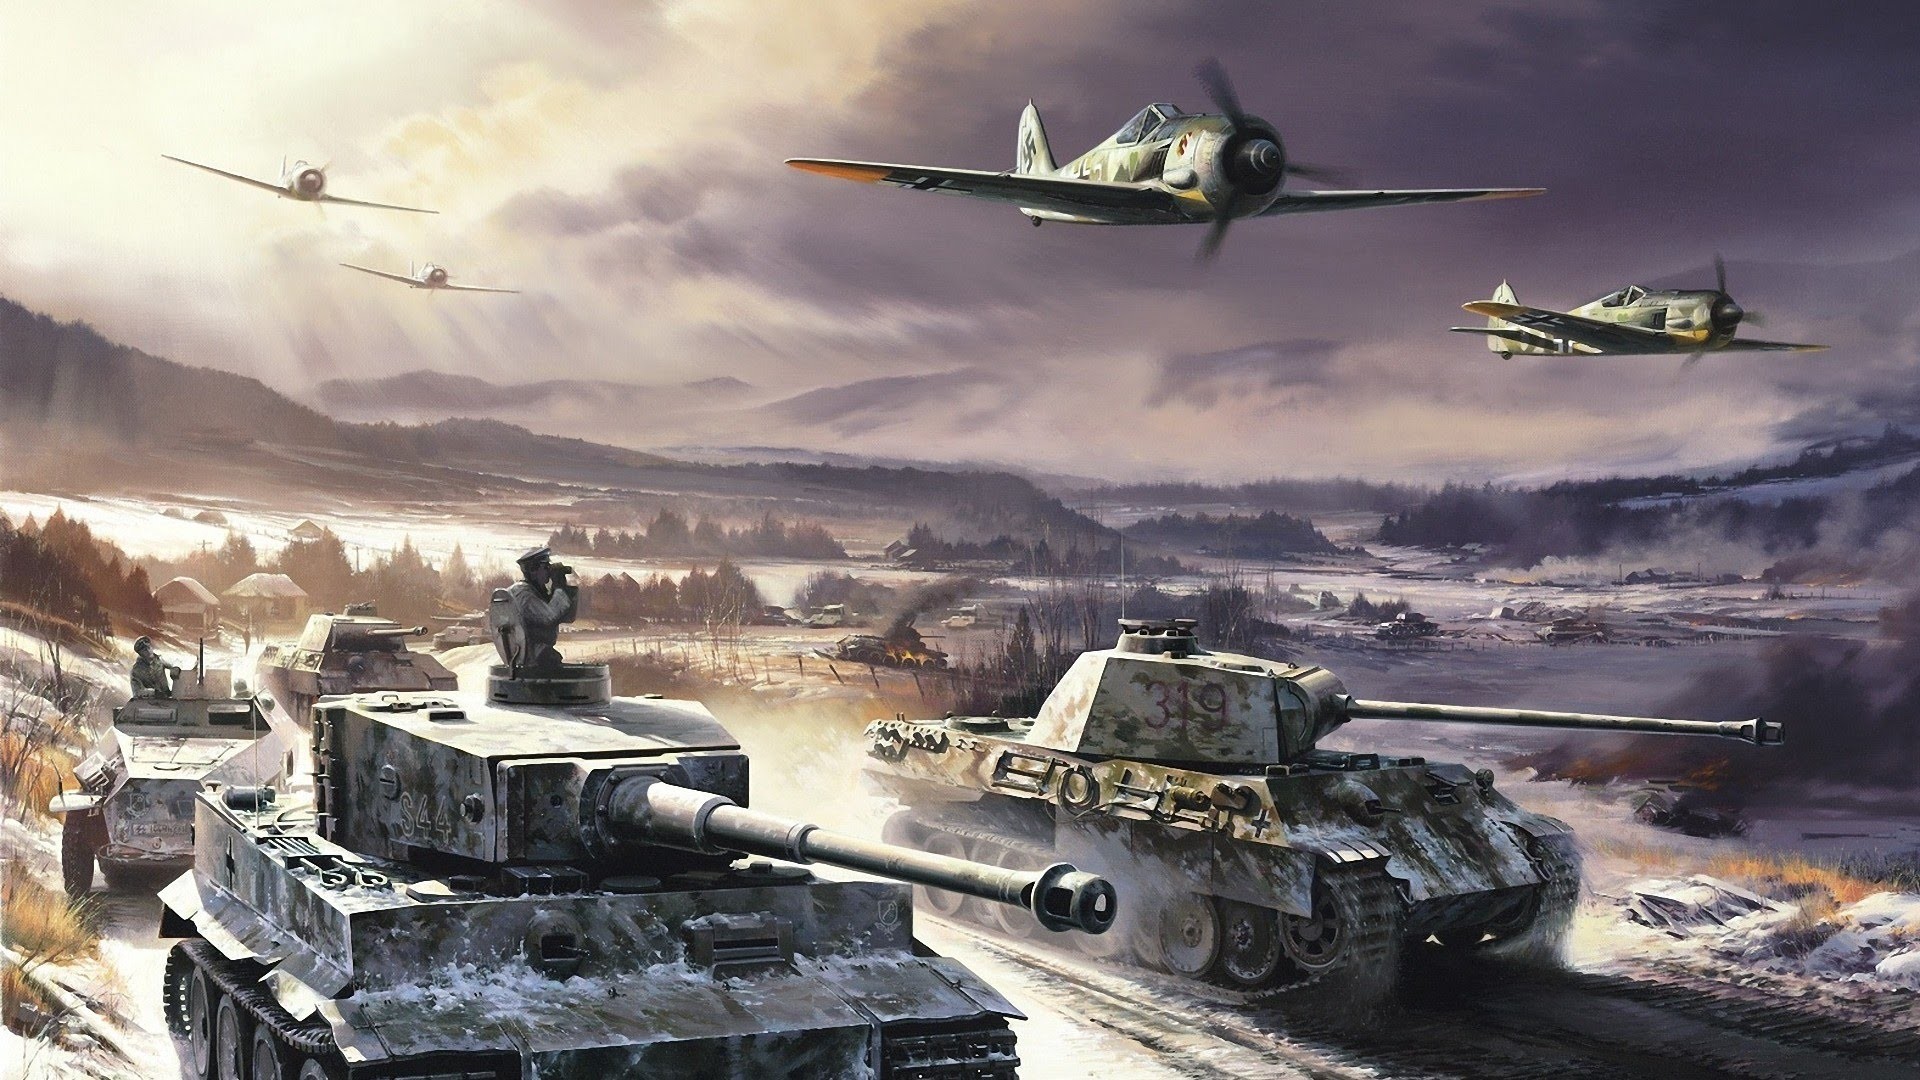 1920x1080 Poster of Tiger, Panther, Sd.Kfz and Luftwaffe fighters going into battle.